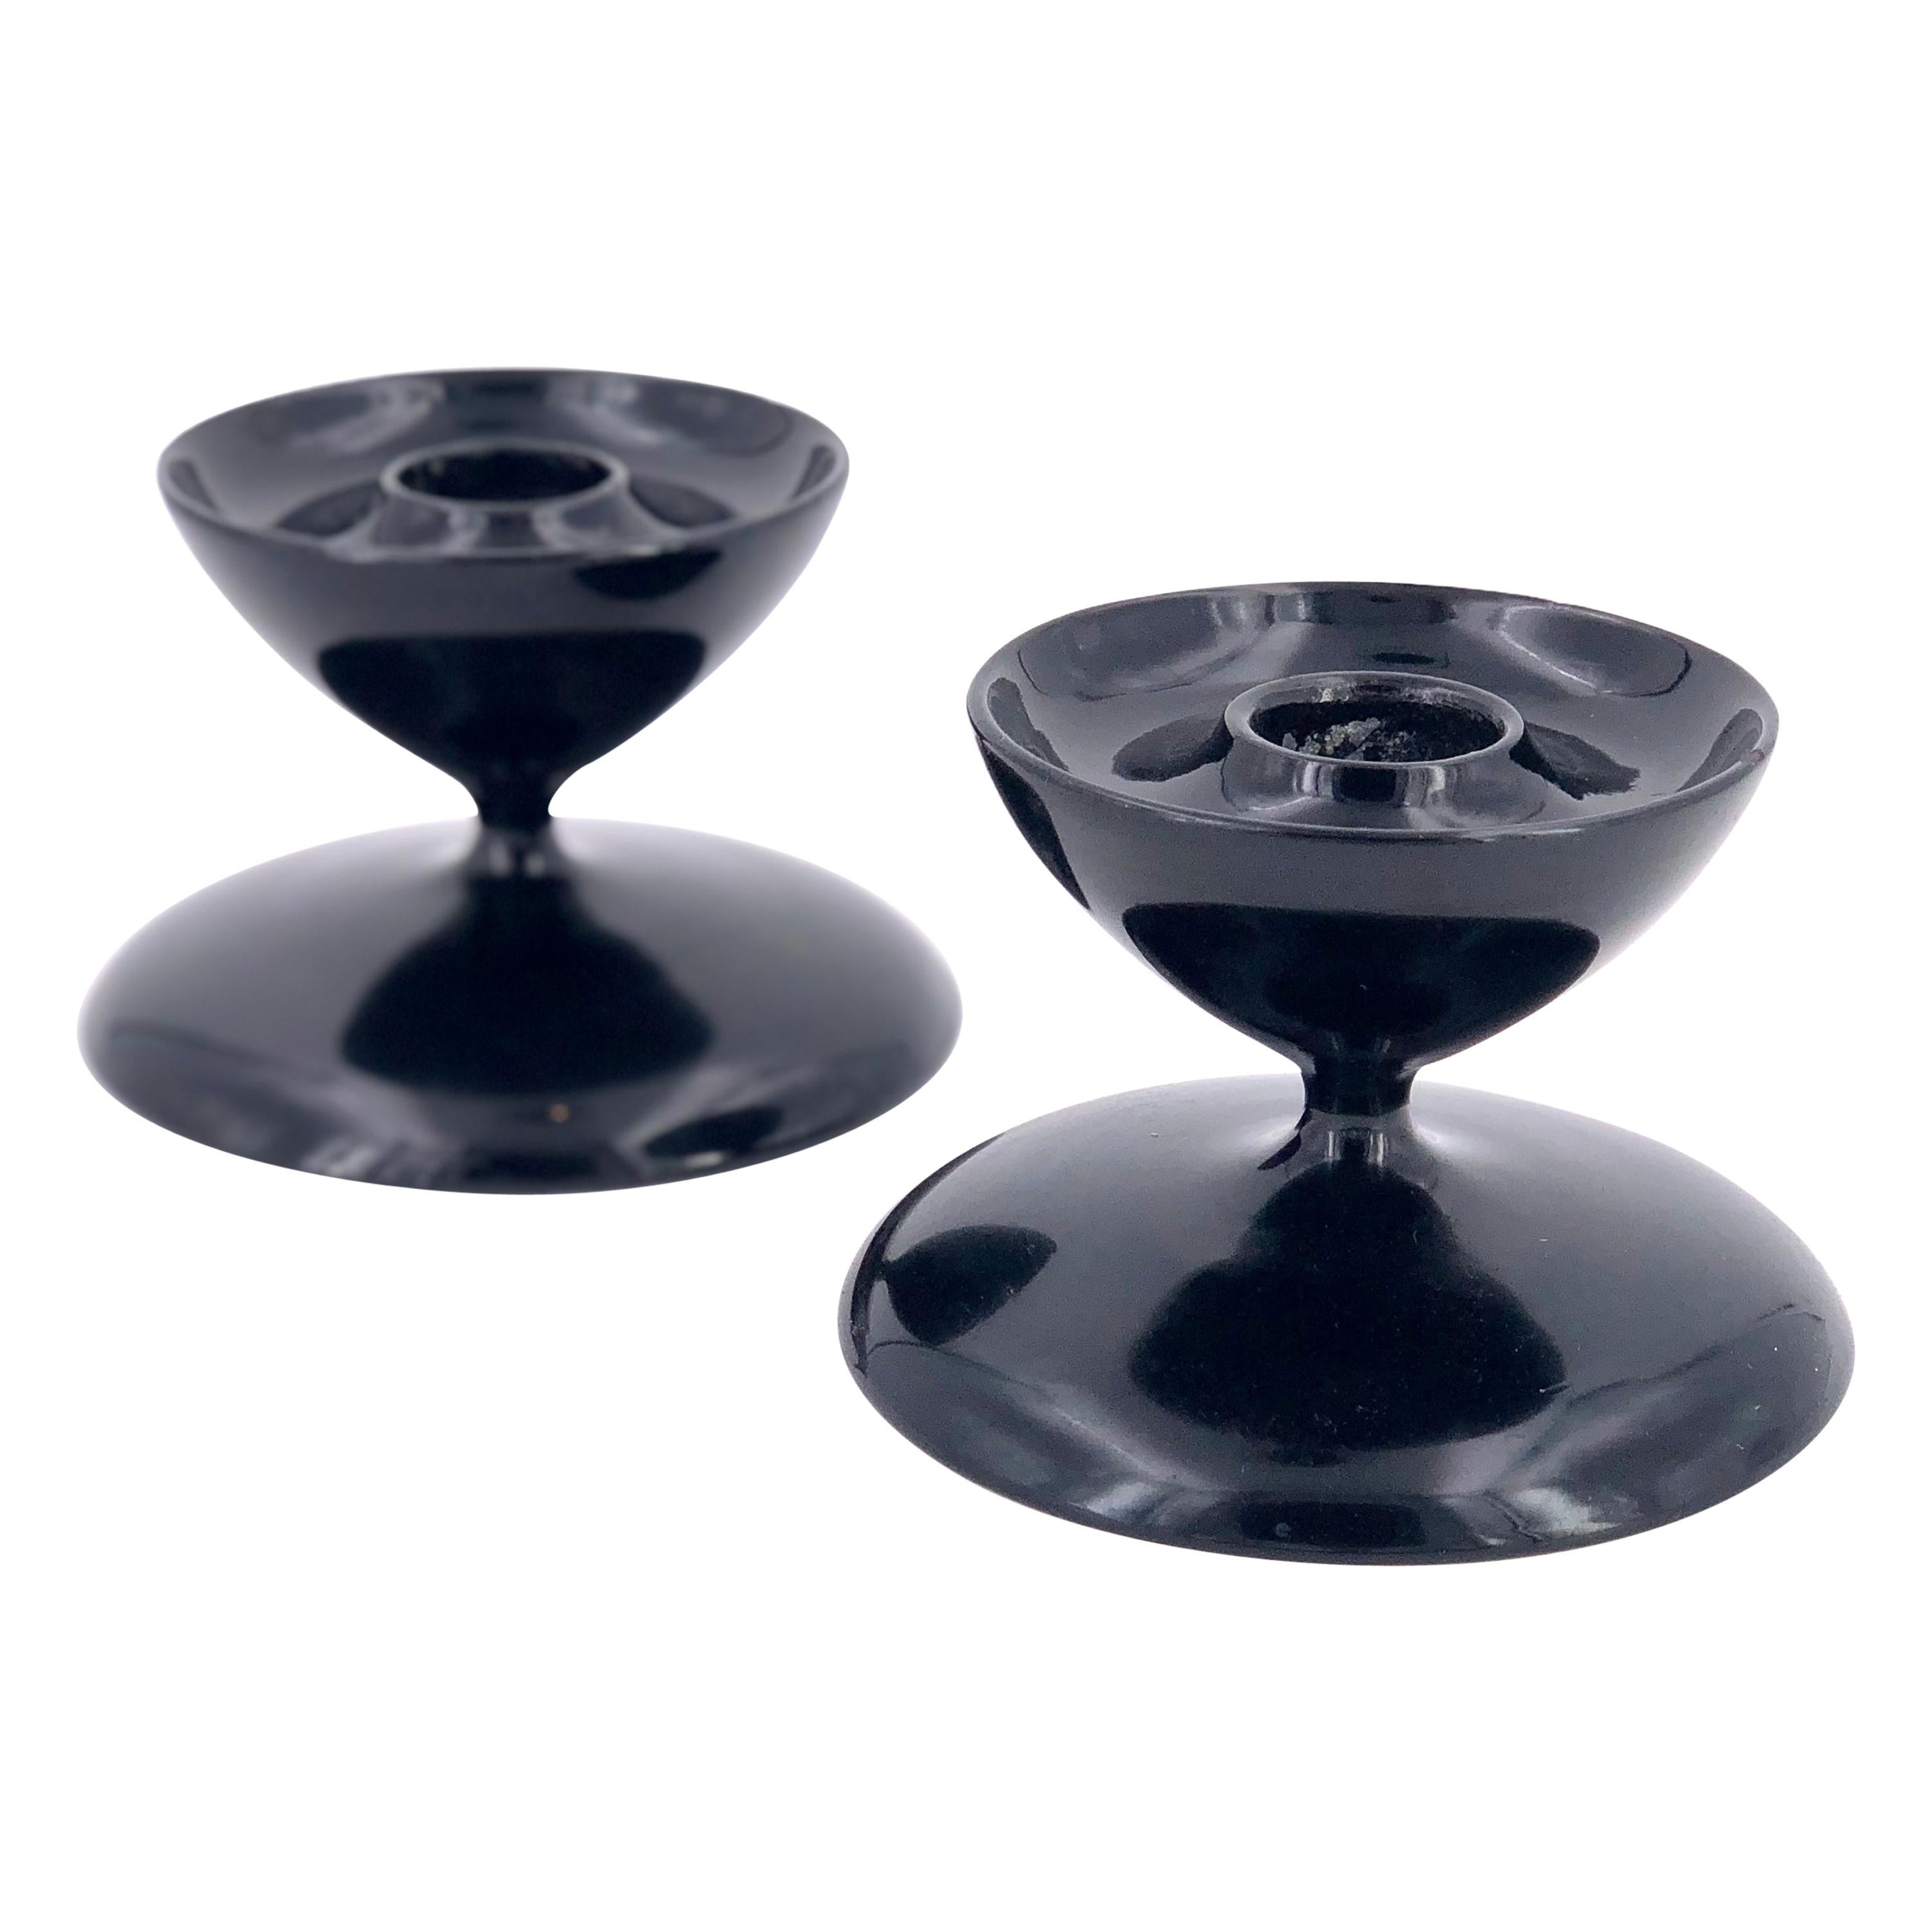 Pair of Modernist Black Lacquer Wood Midcentury Candleholders